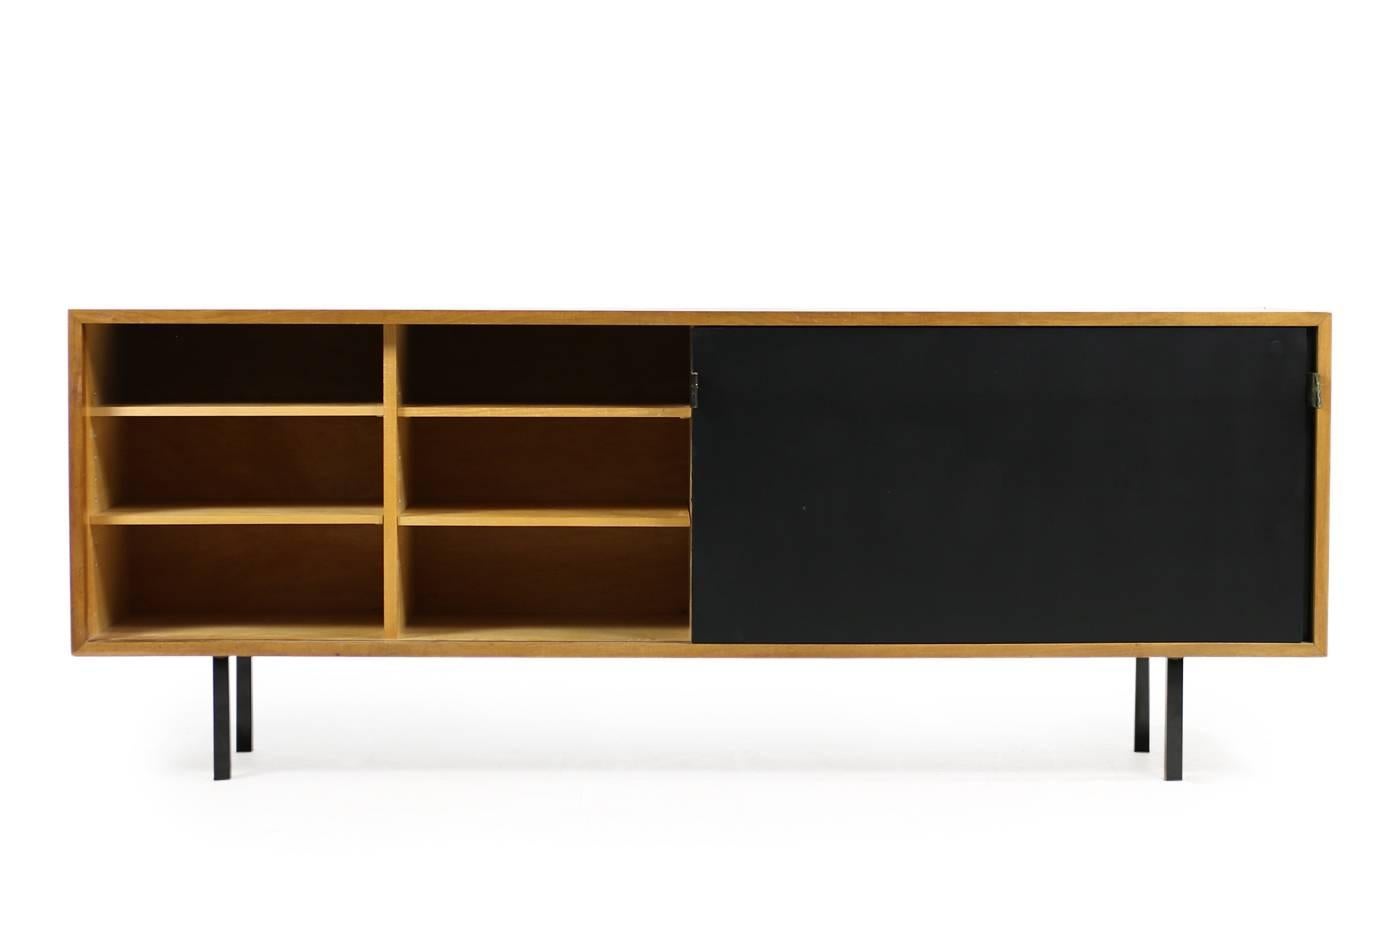 Beautiful, Florence Knoll sideboard model 116 for Knoll International, manufactured for Knoll for Wohnbedarf S.A Switzerland in the 1950s.
Fantastic condition, adjustable shelves inside, cherrywood and maplewood. Metal legs, leather handles with